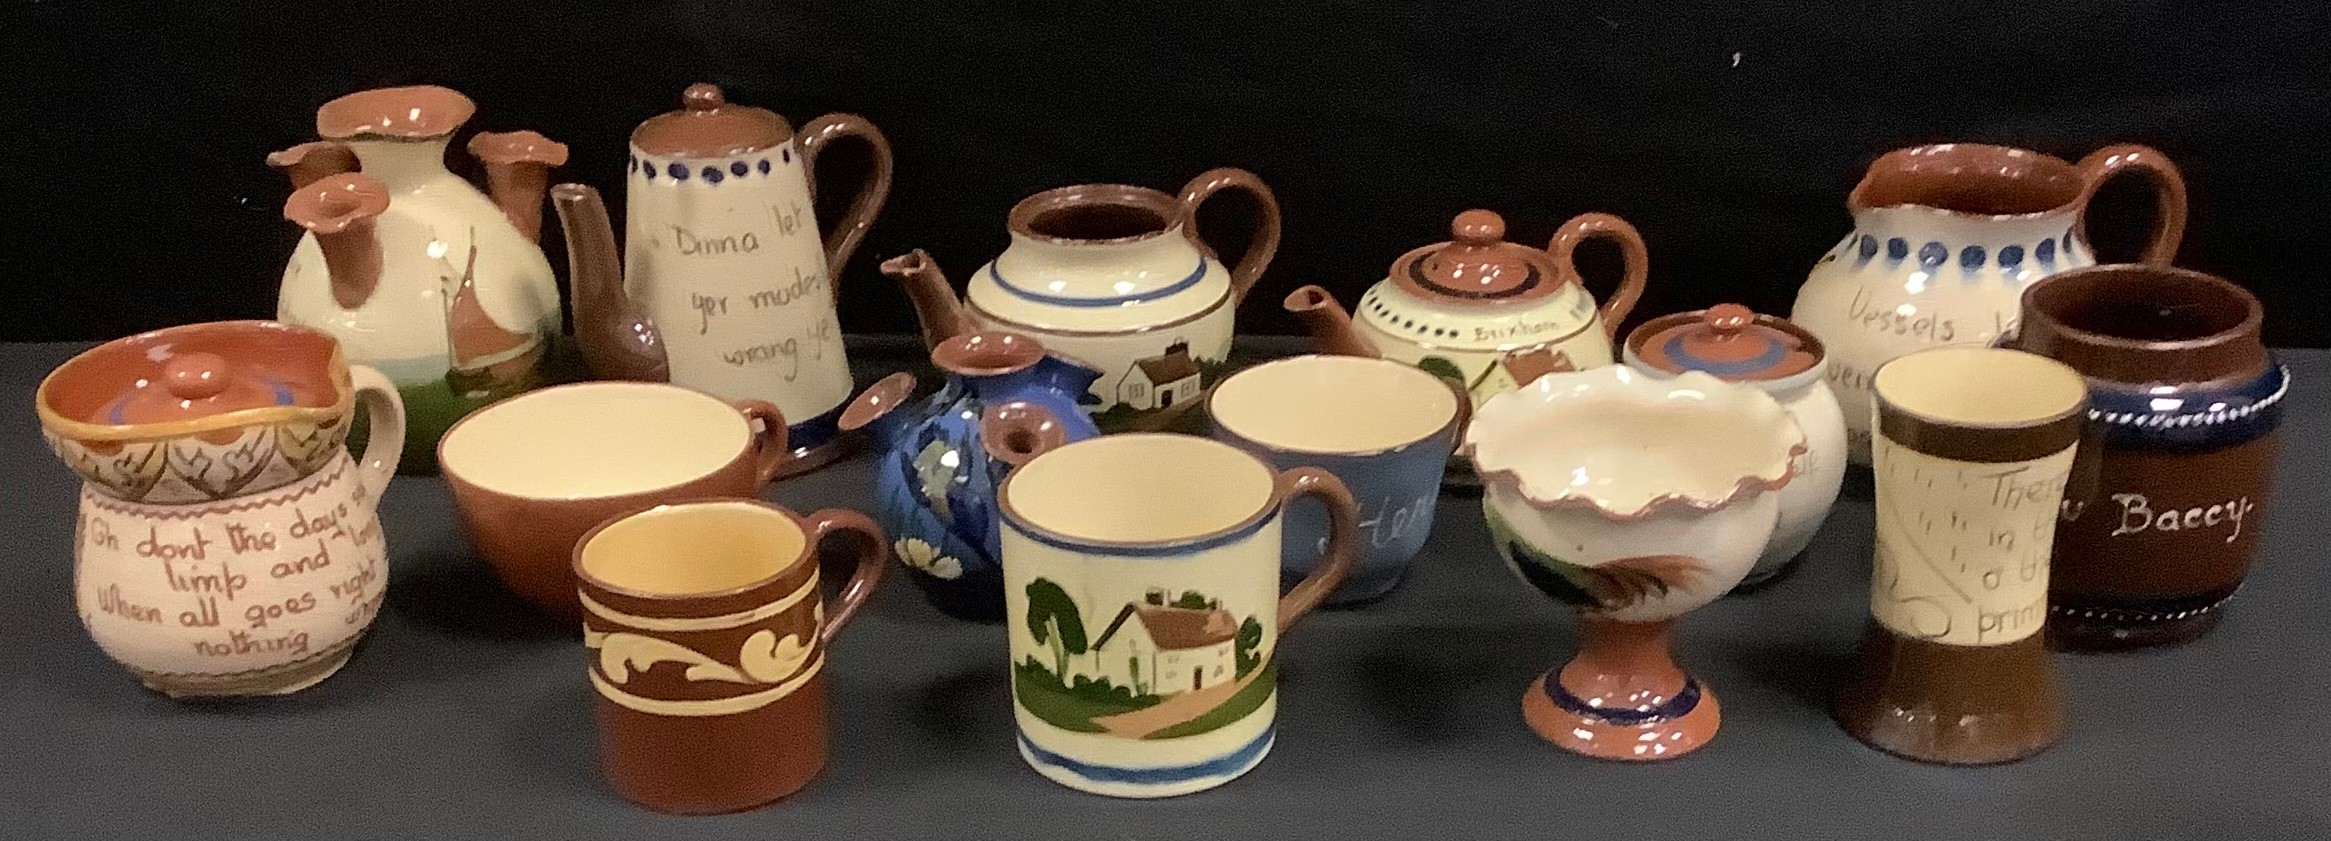 Torquay ware and Devon ware pottery; a small teapot, decorated with a country cottage in 'Brixham'